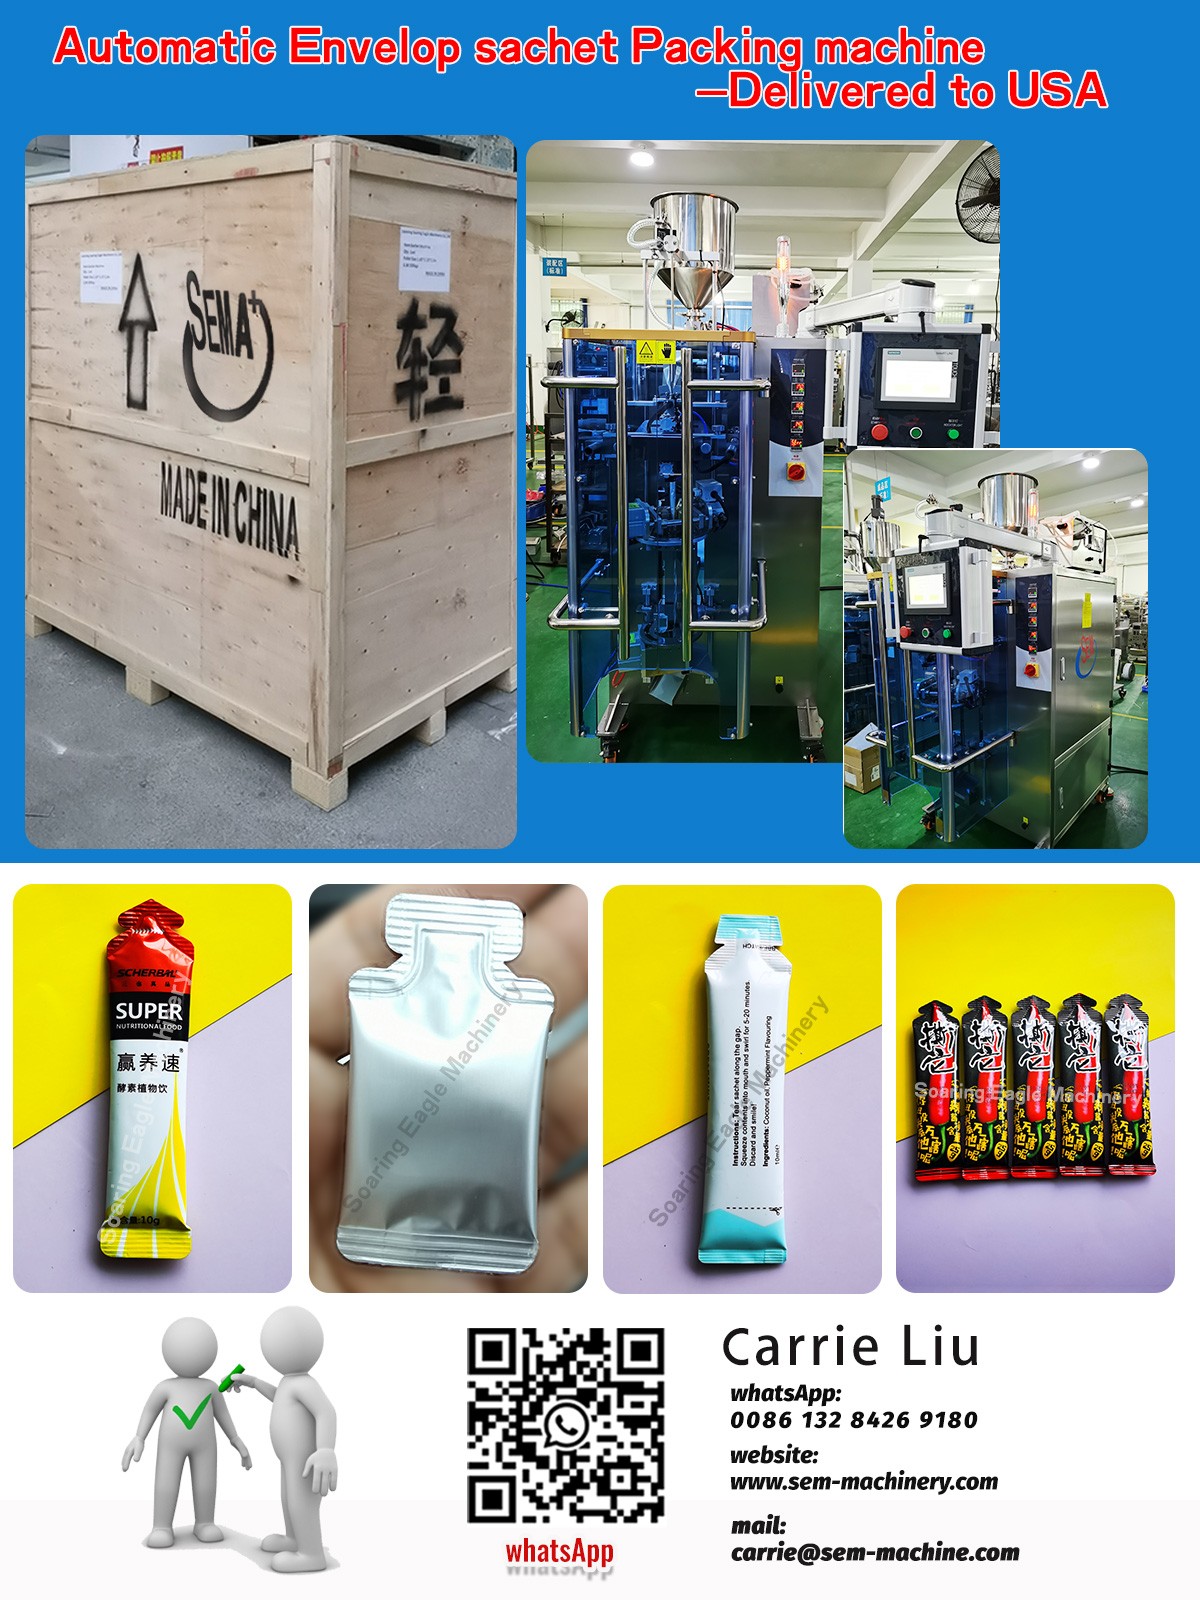 Autoamtic Envelop sachet Packing machine--Delivered to USA